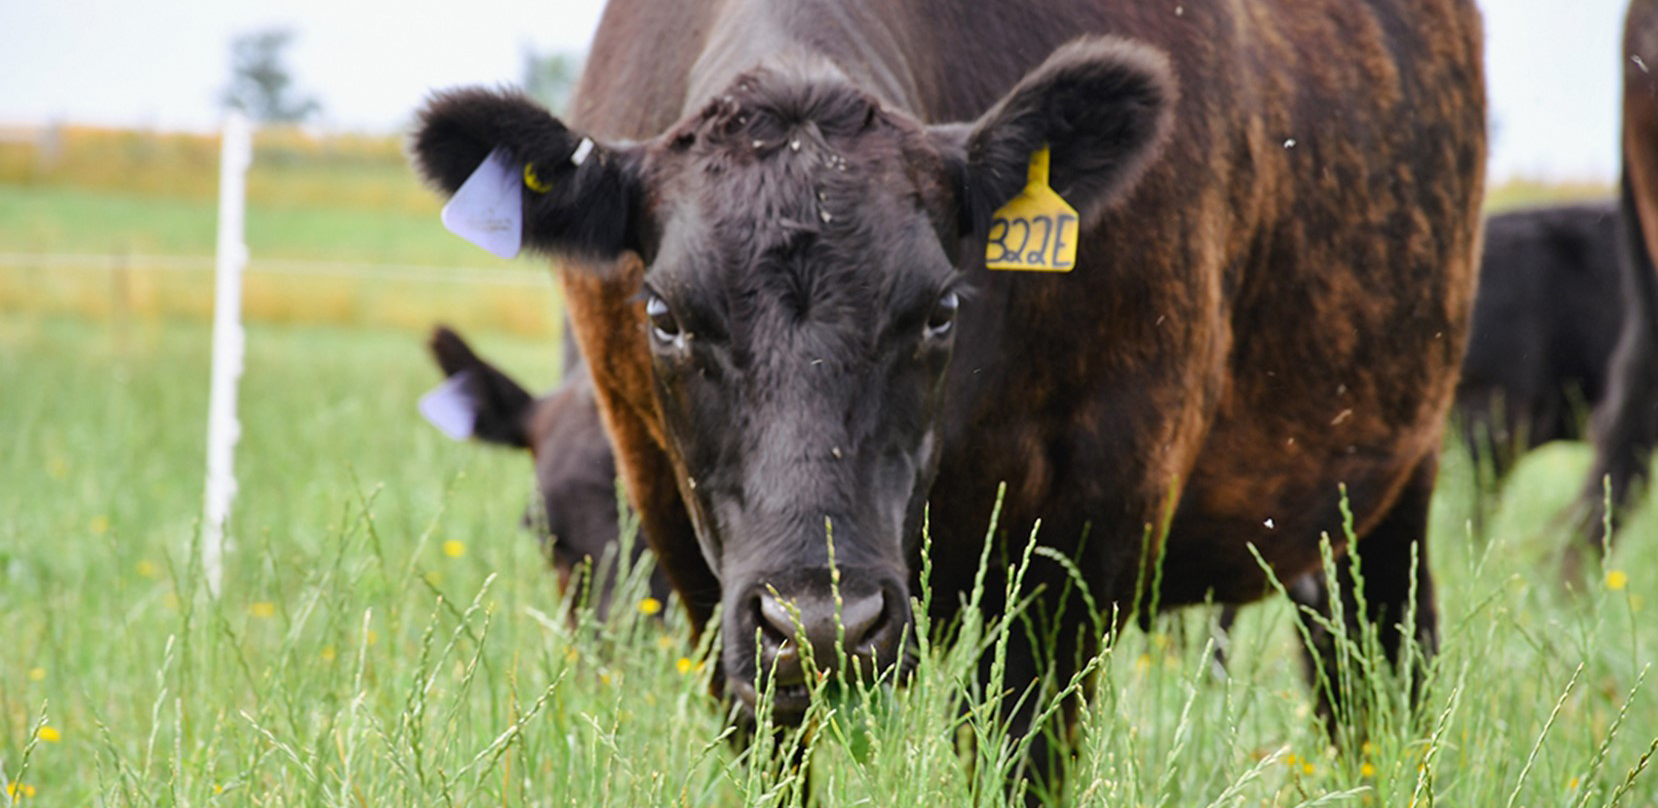 Black cow in a grass pasture looking at the camera.